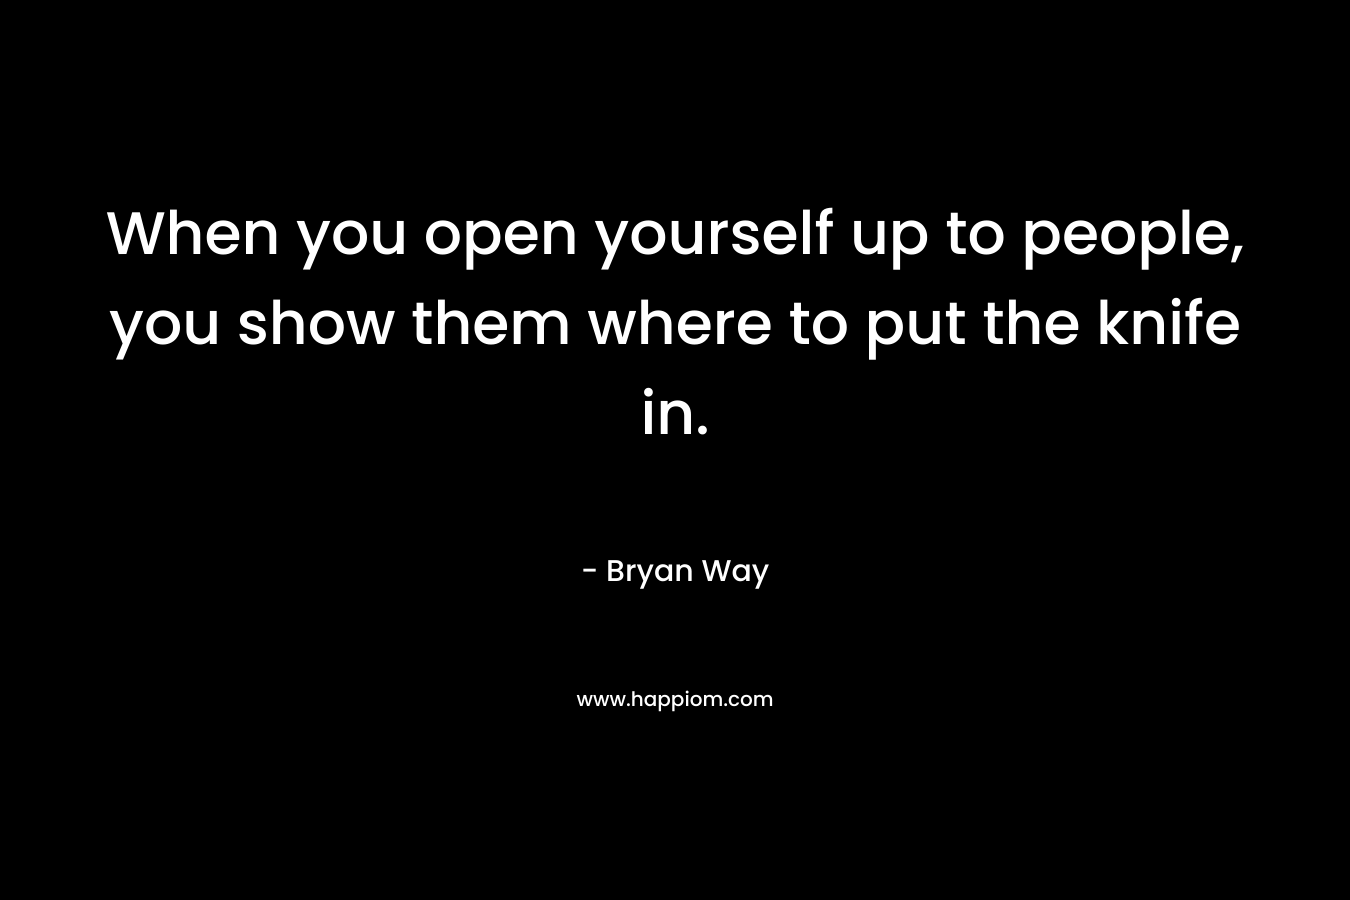 When you open yourself up to people, you show them where to put the knife in. – Bryan Way